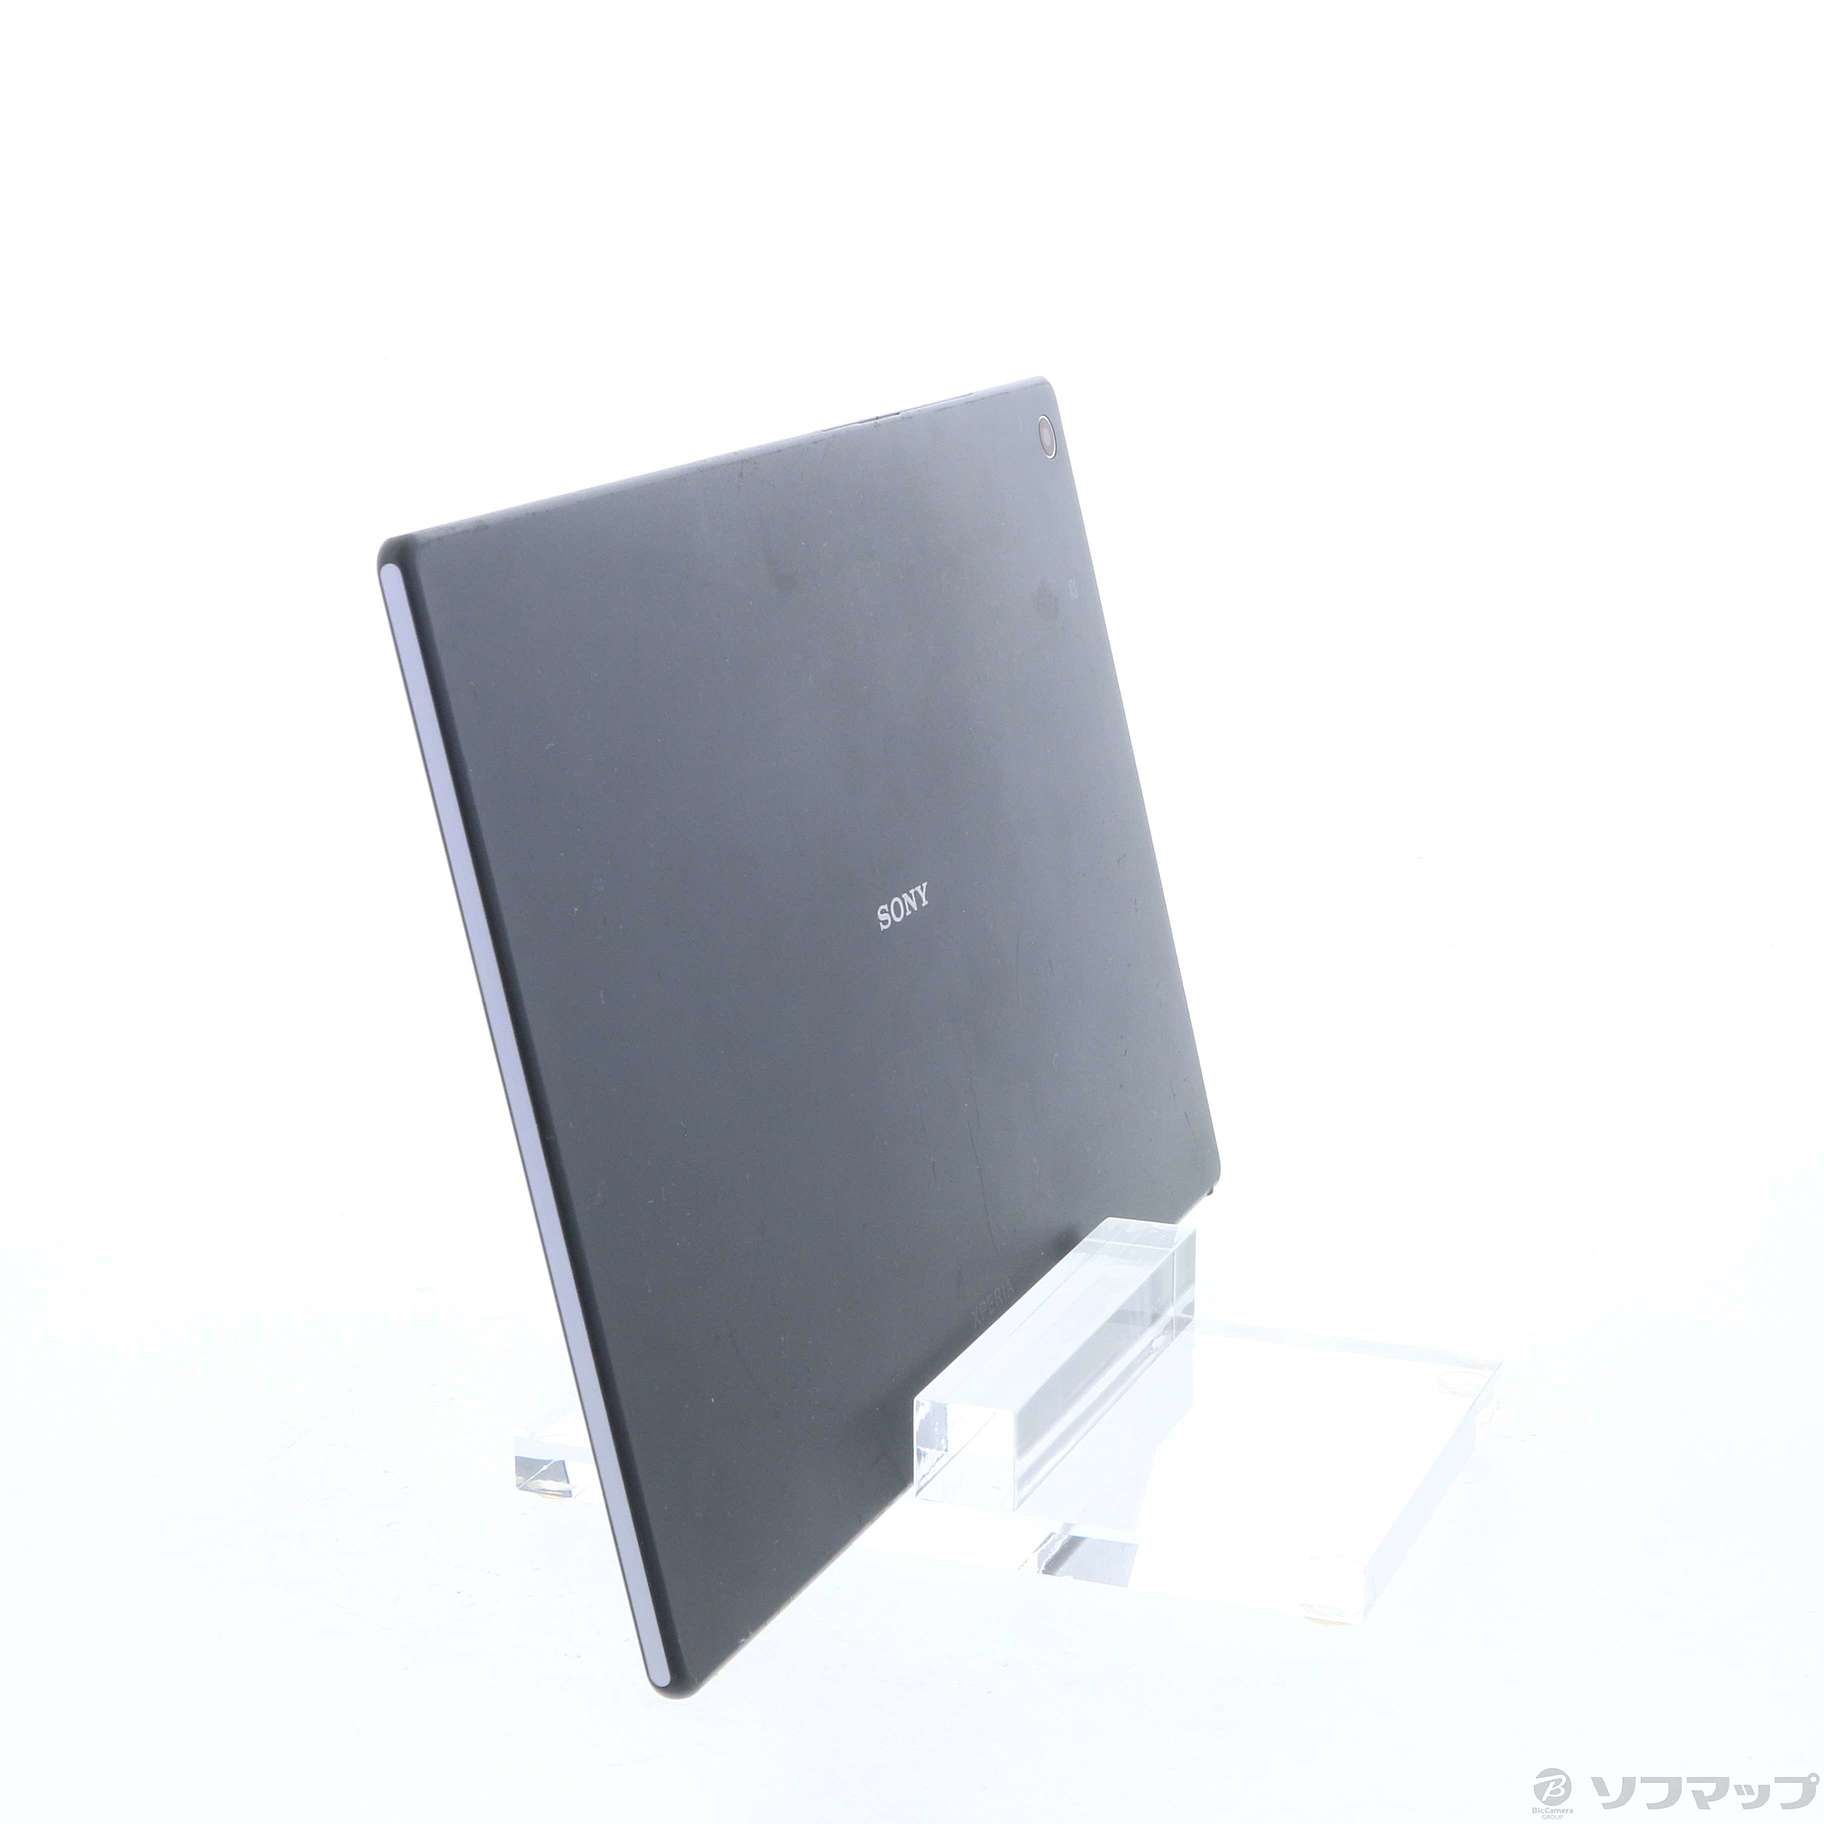 SONY XPERIA Z2 Tablet SGP512JP/BPC/タブレット